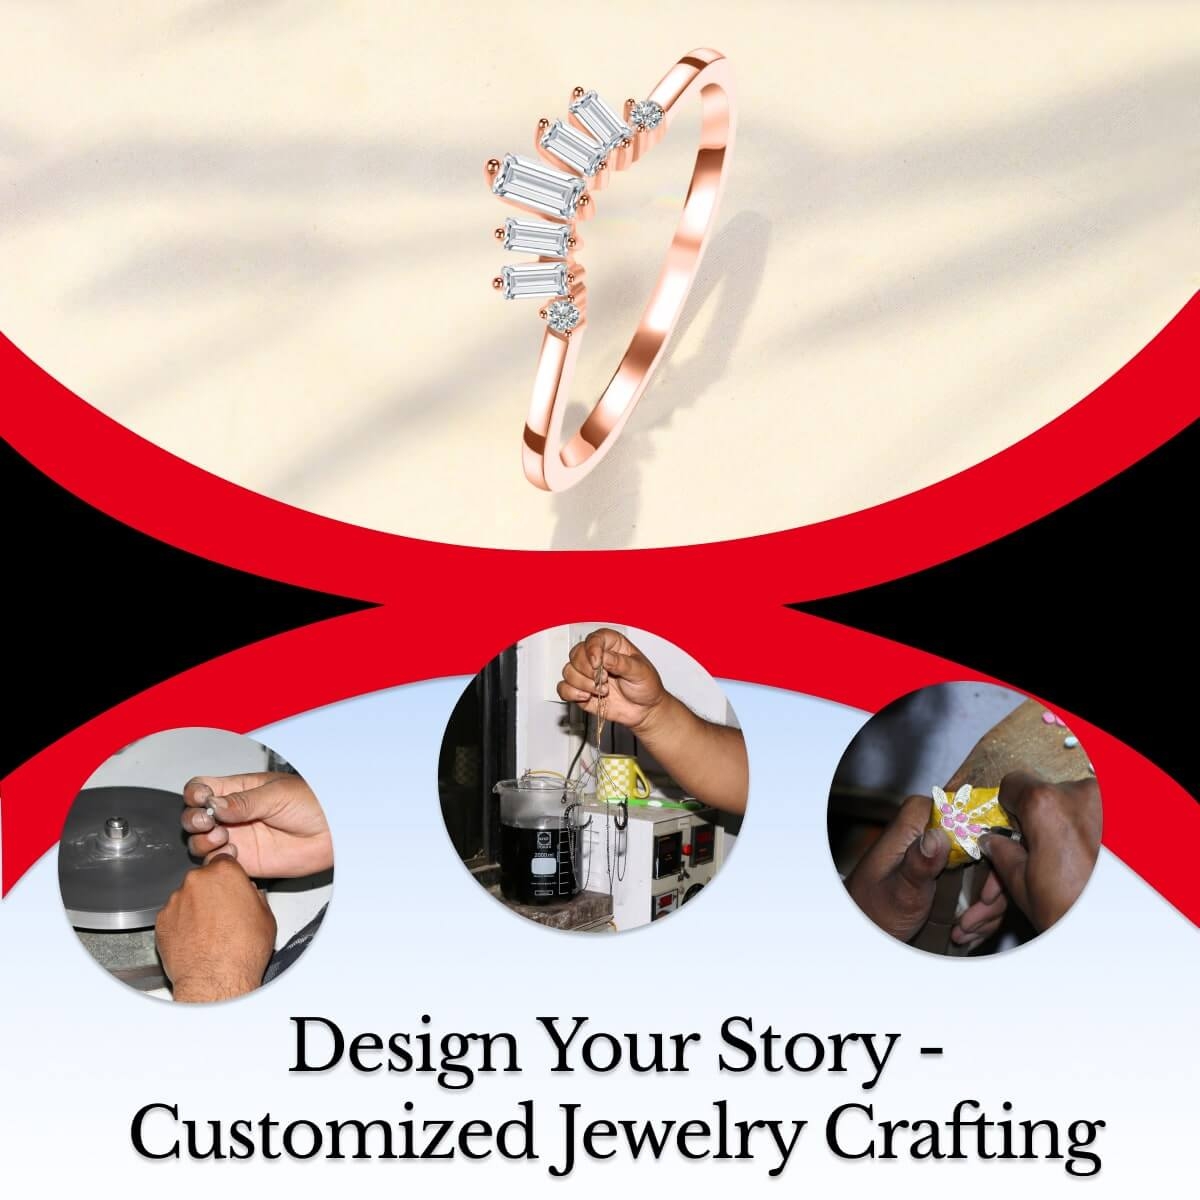 How to Customize Jewelry